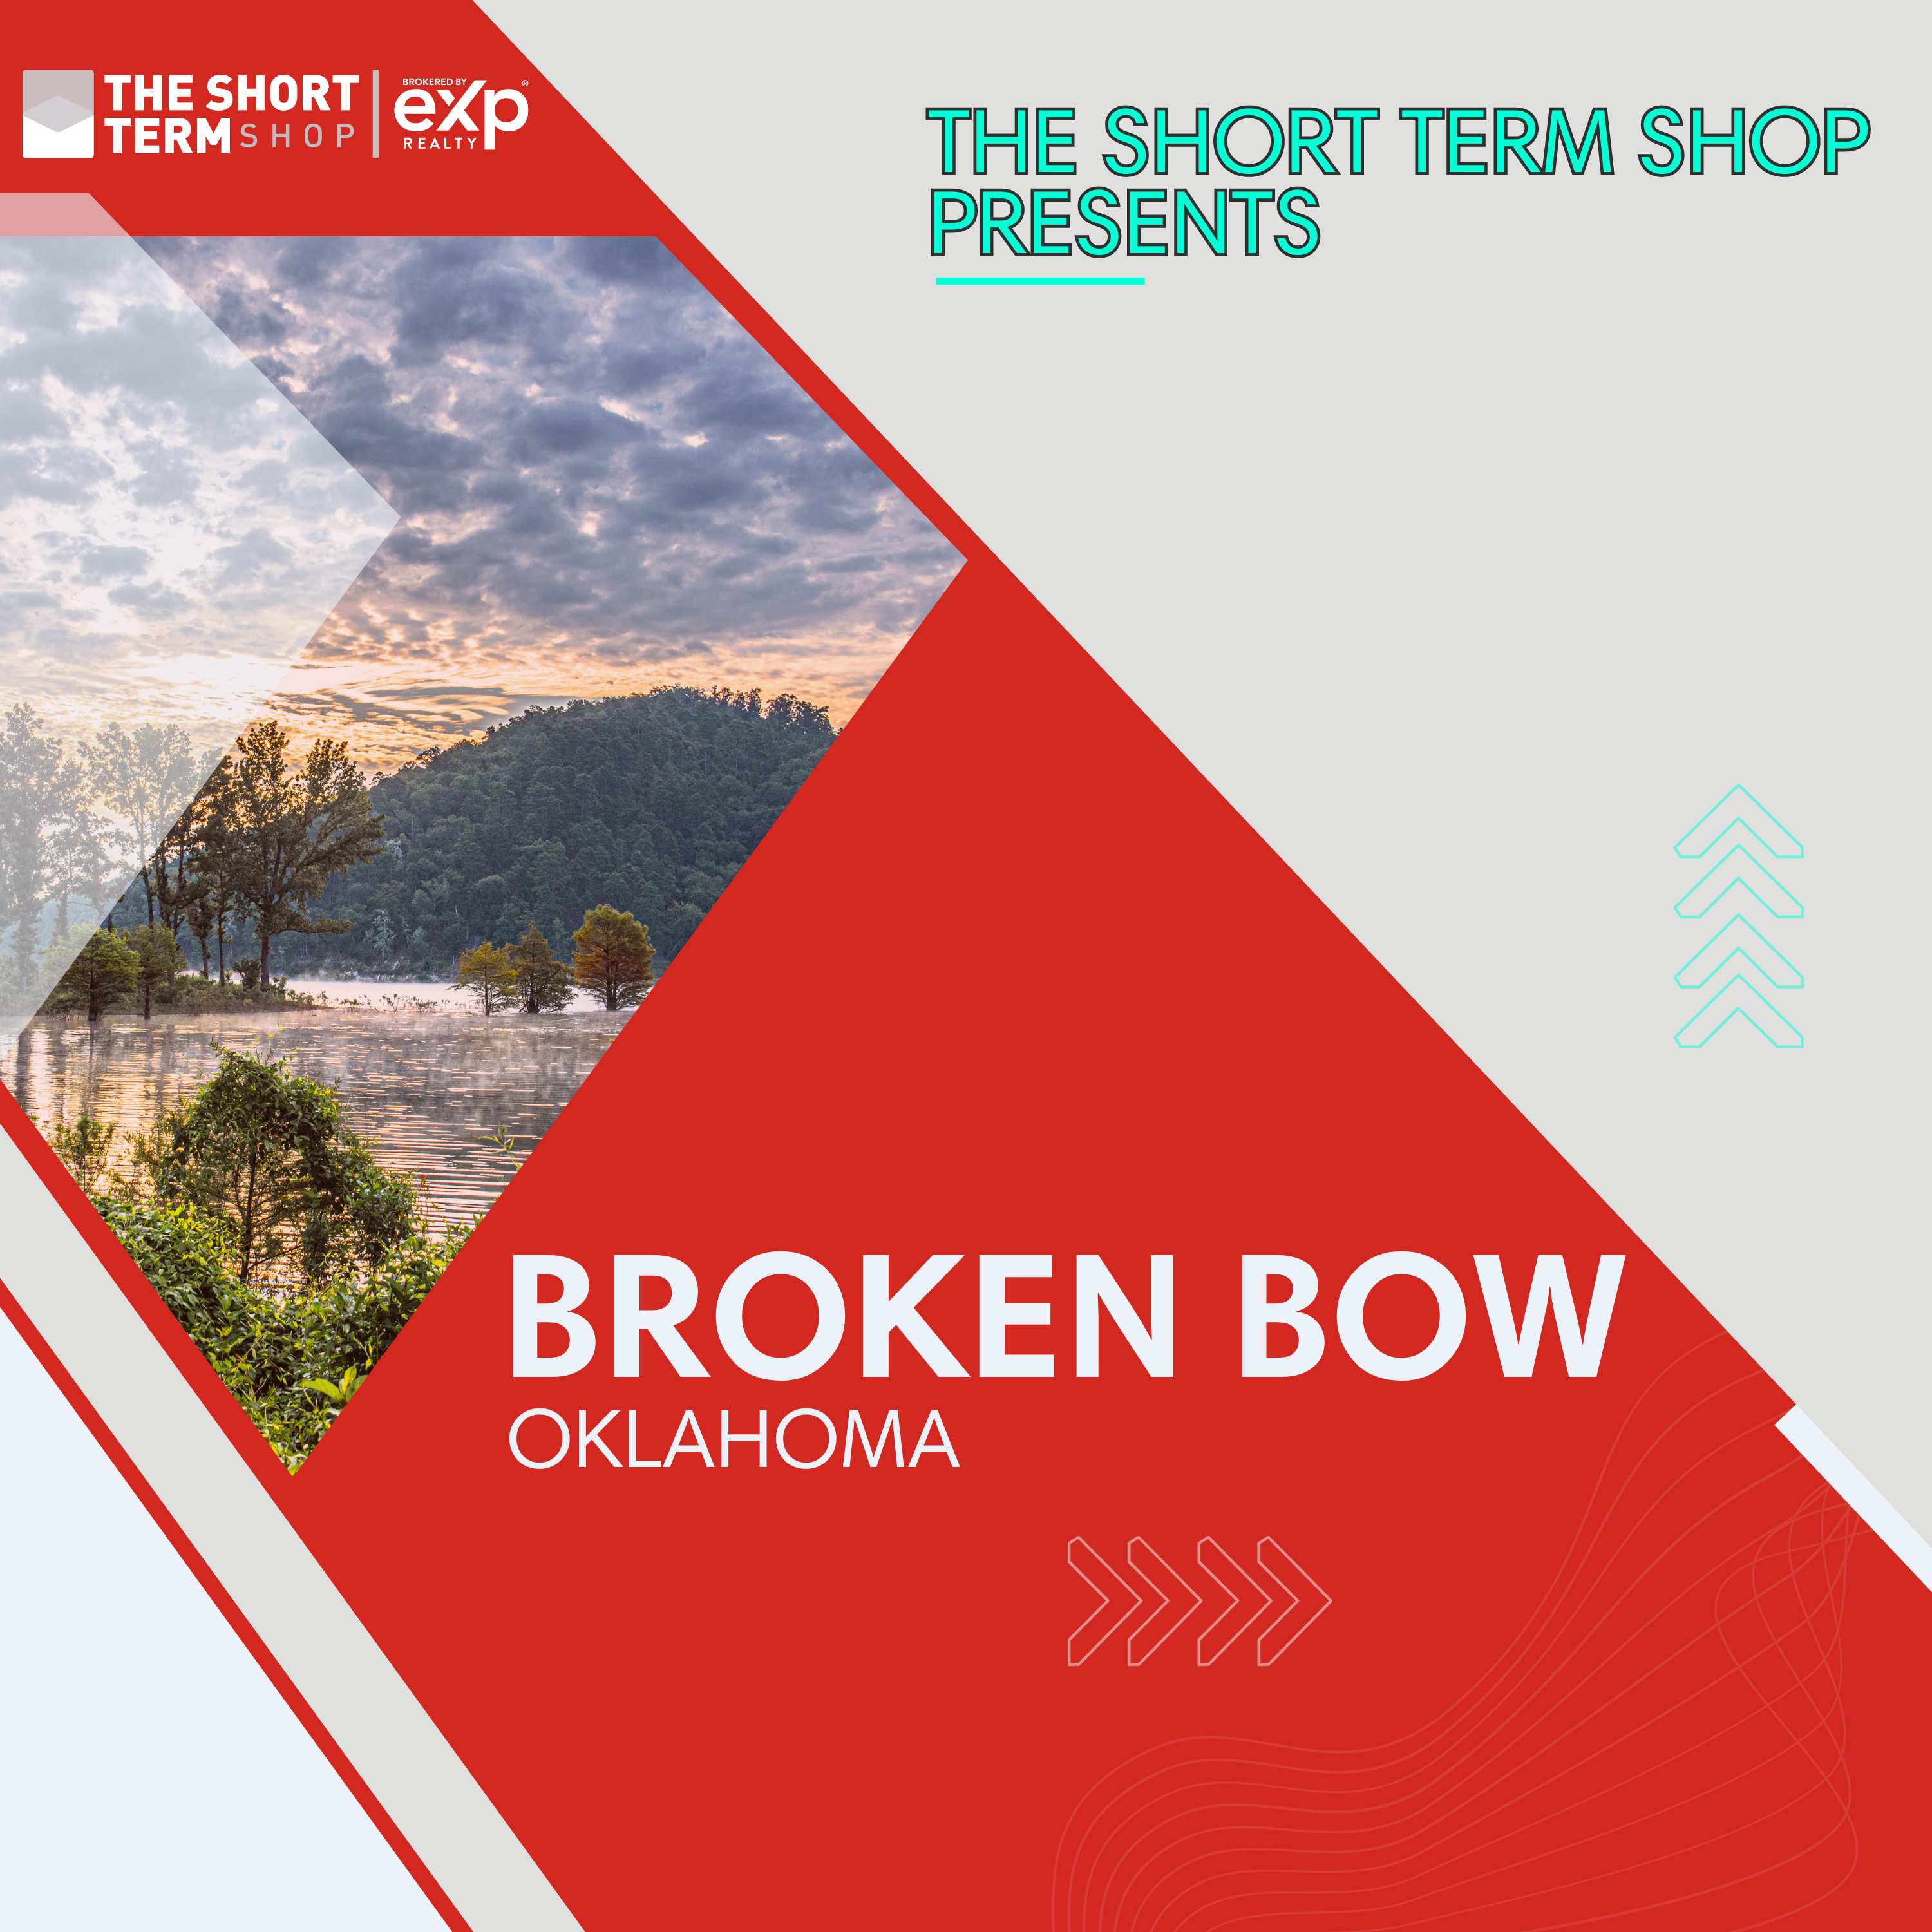 The Real Estate Contract Process When Investing In Short Term Rentals In Broken Bow, OK